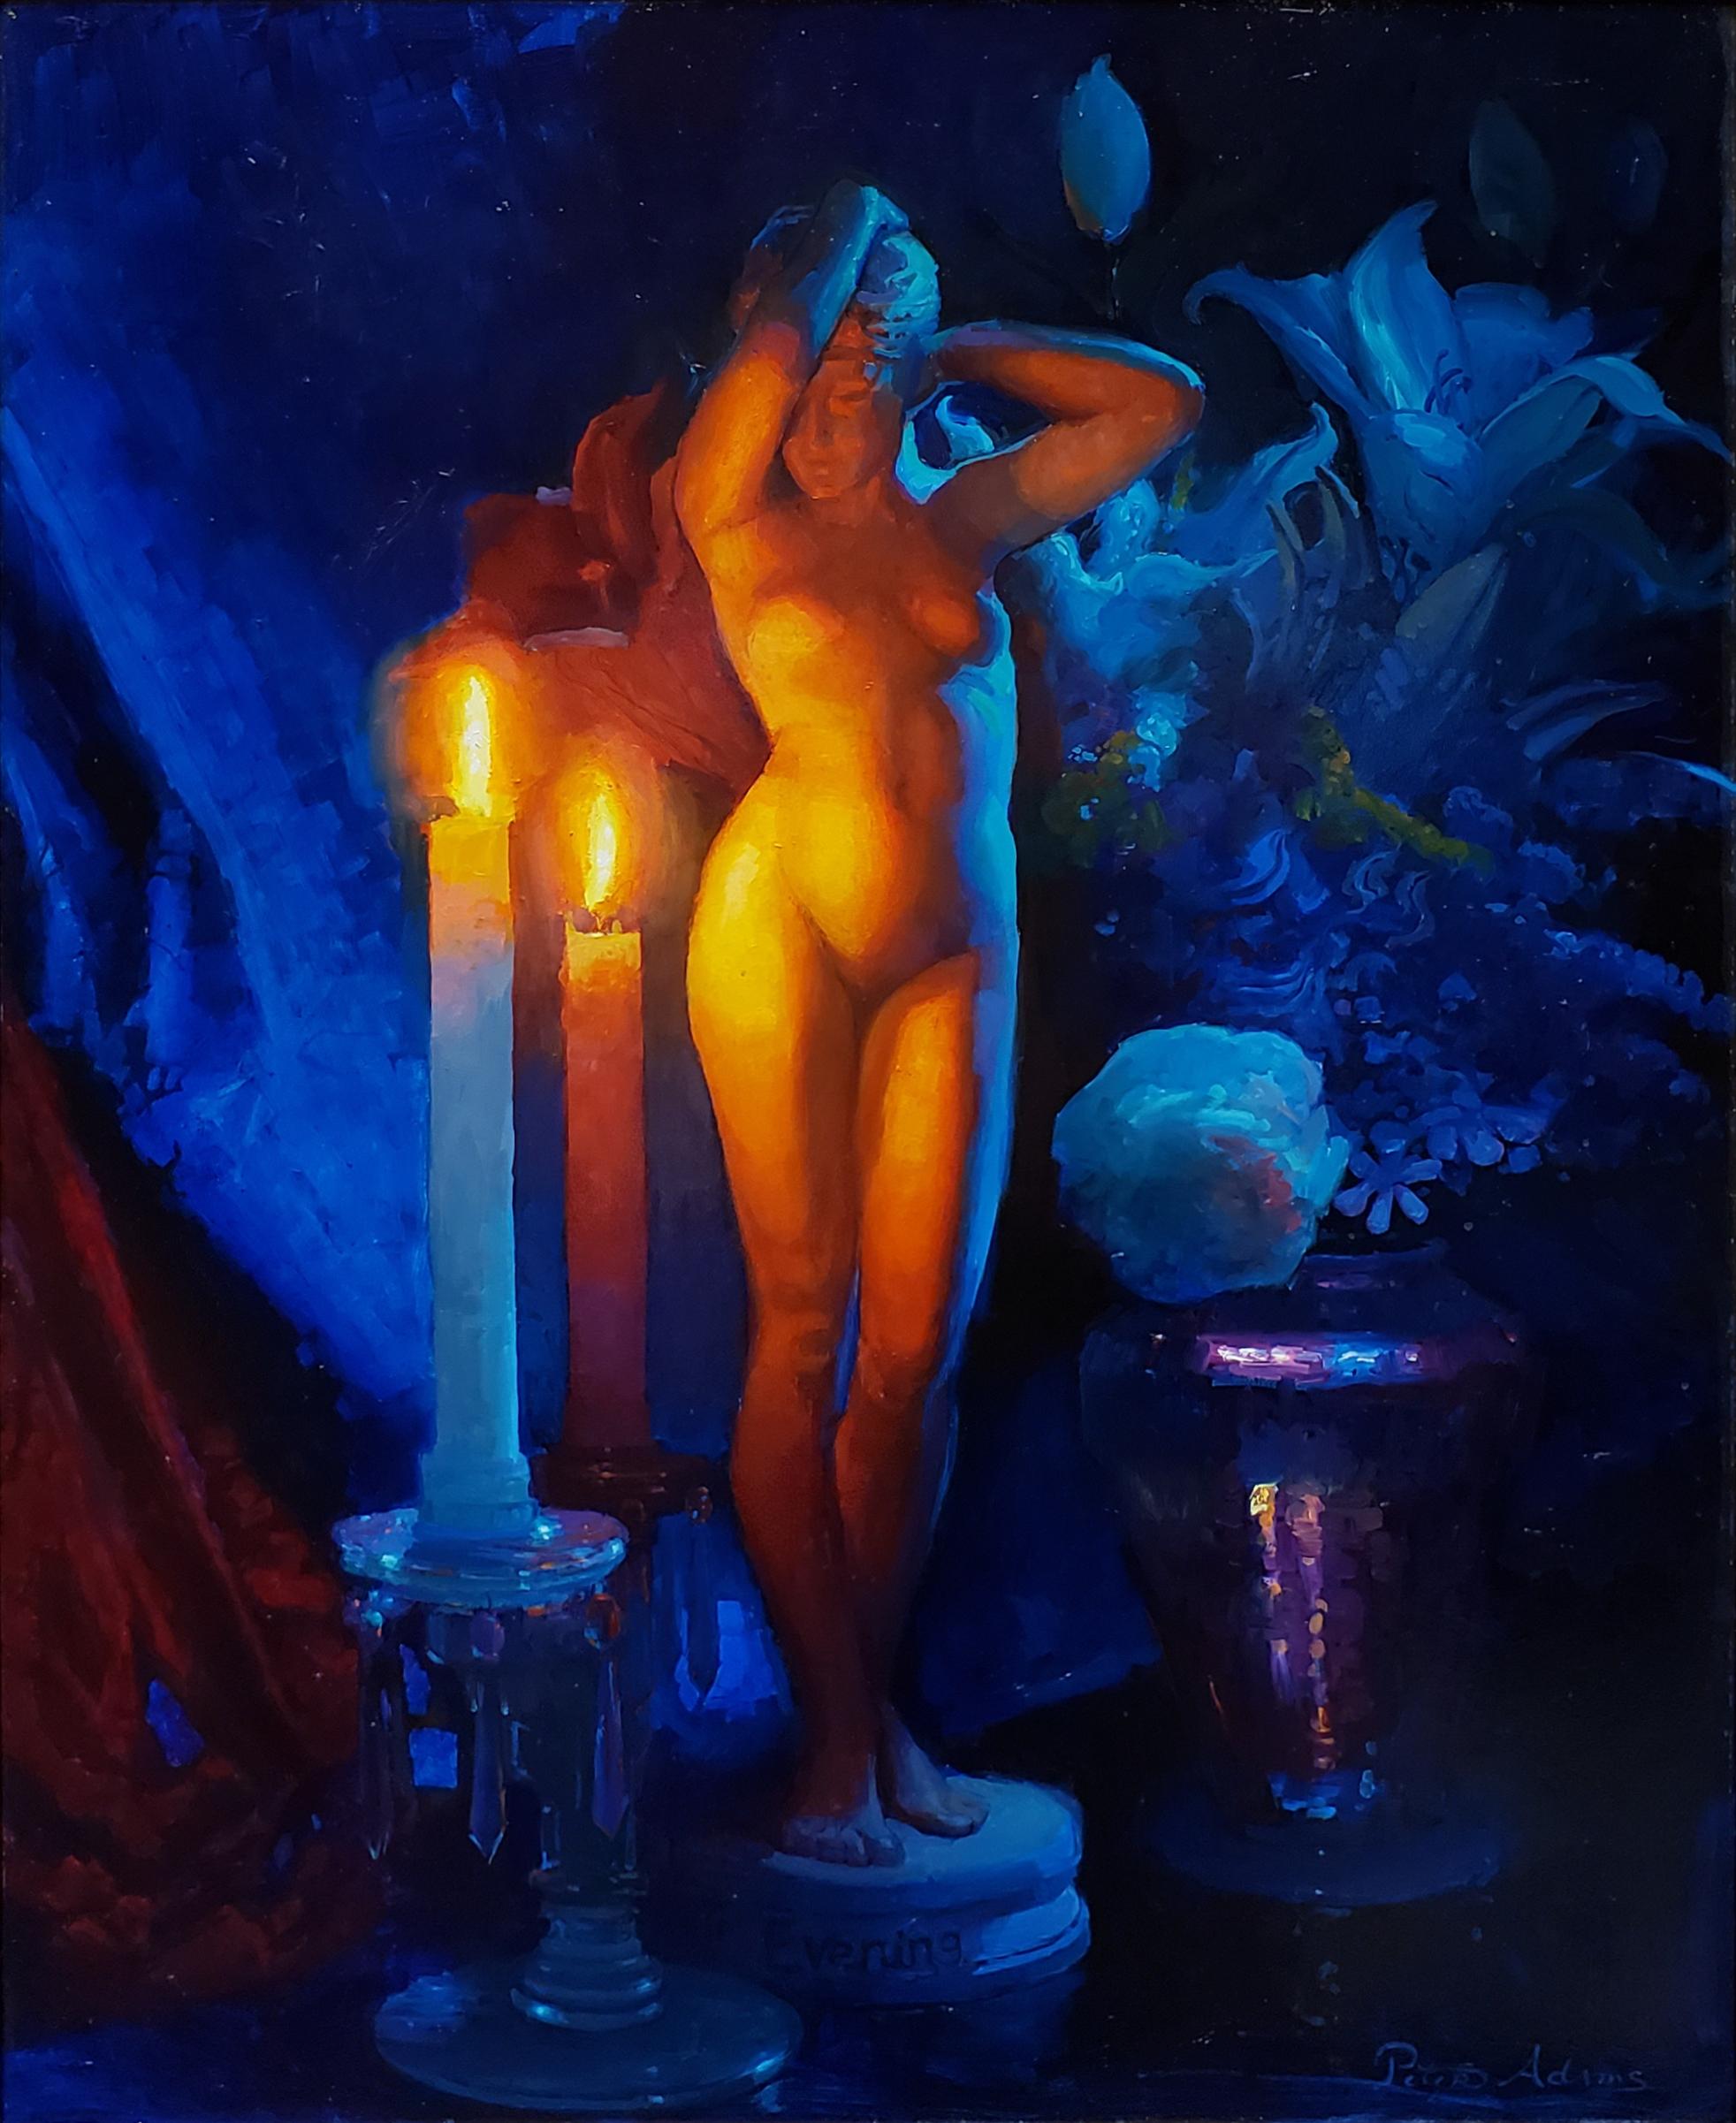 Beauty in Nocturne: Ruckstull's Sculpture of Evening - Impressionist Painting by Peter Adams